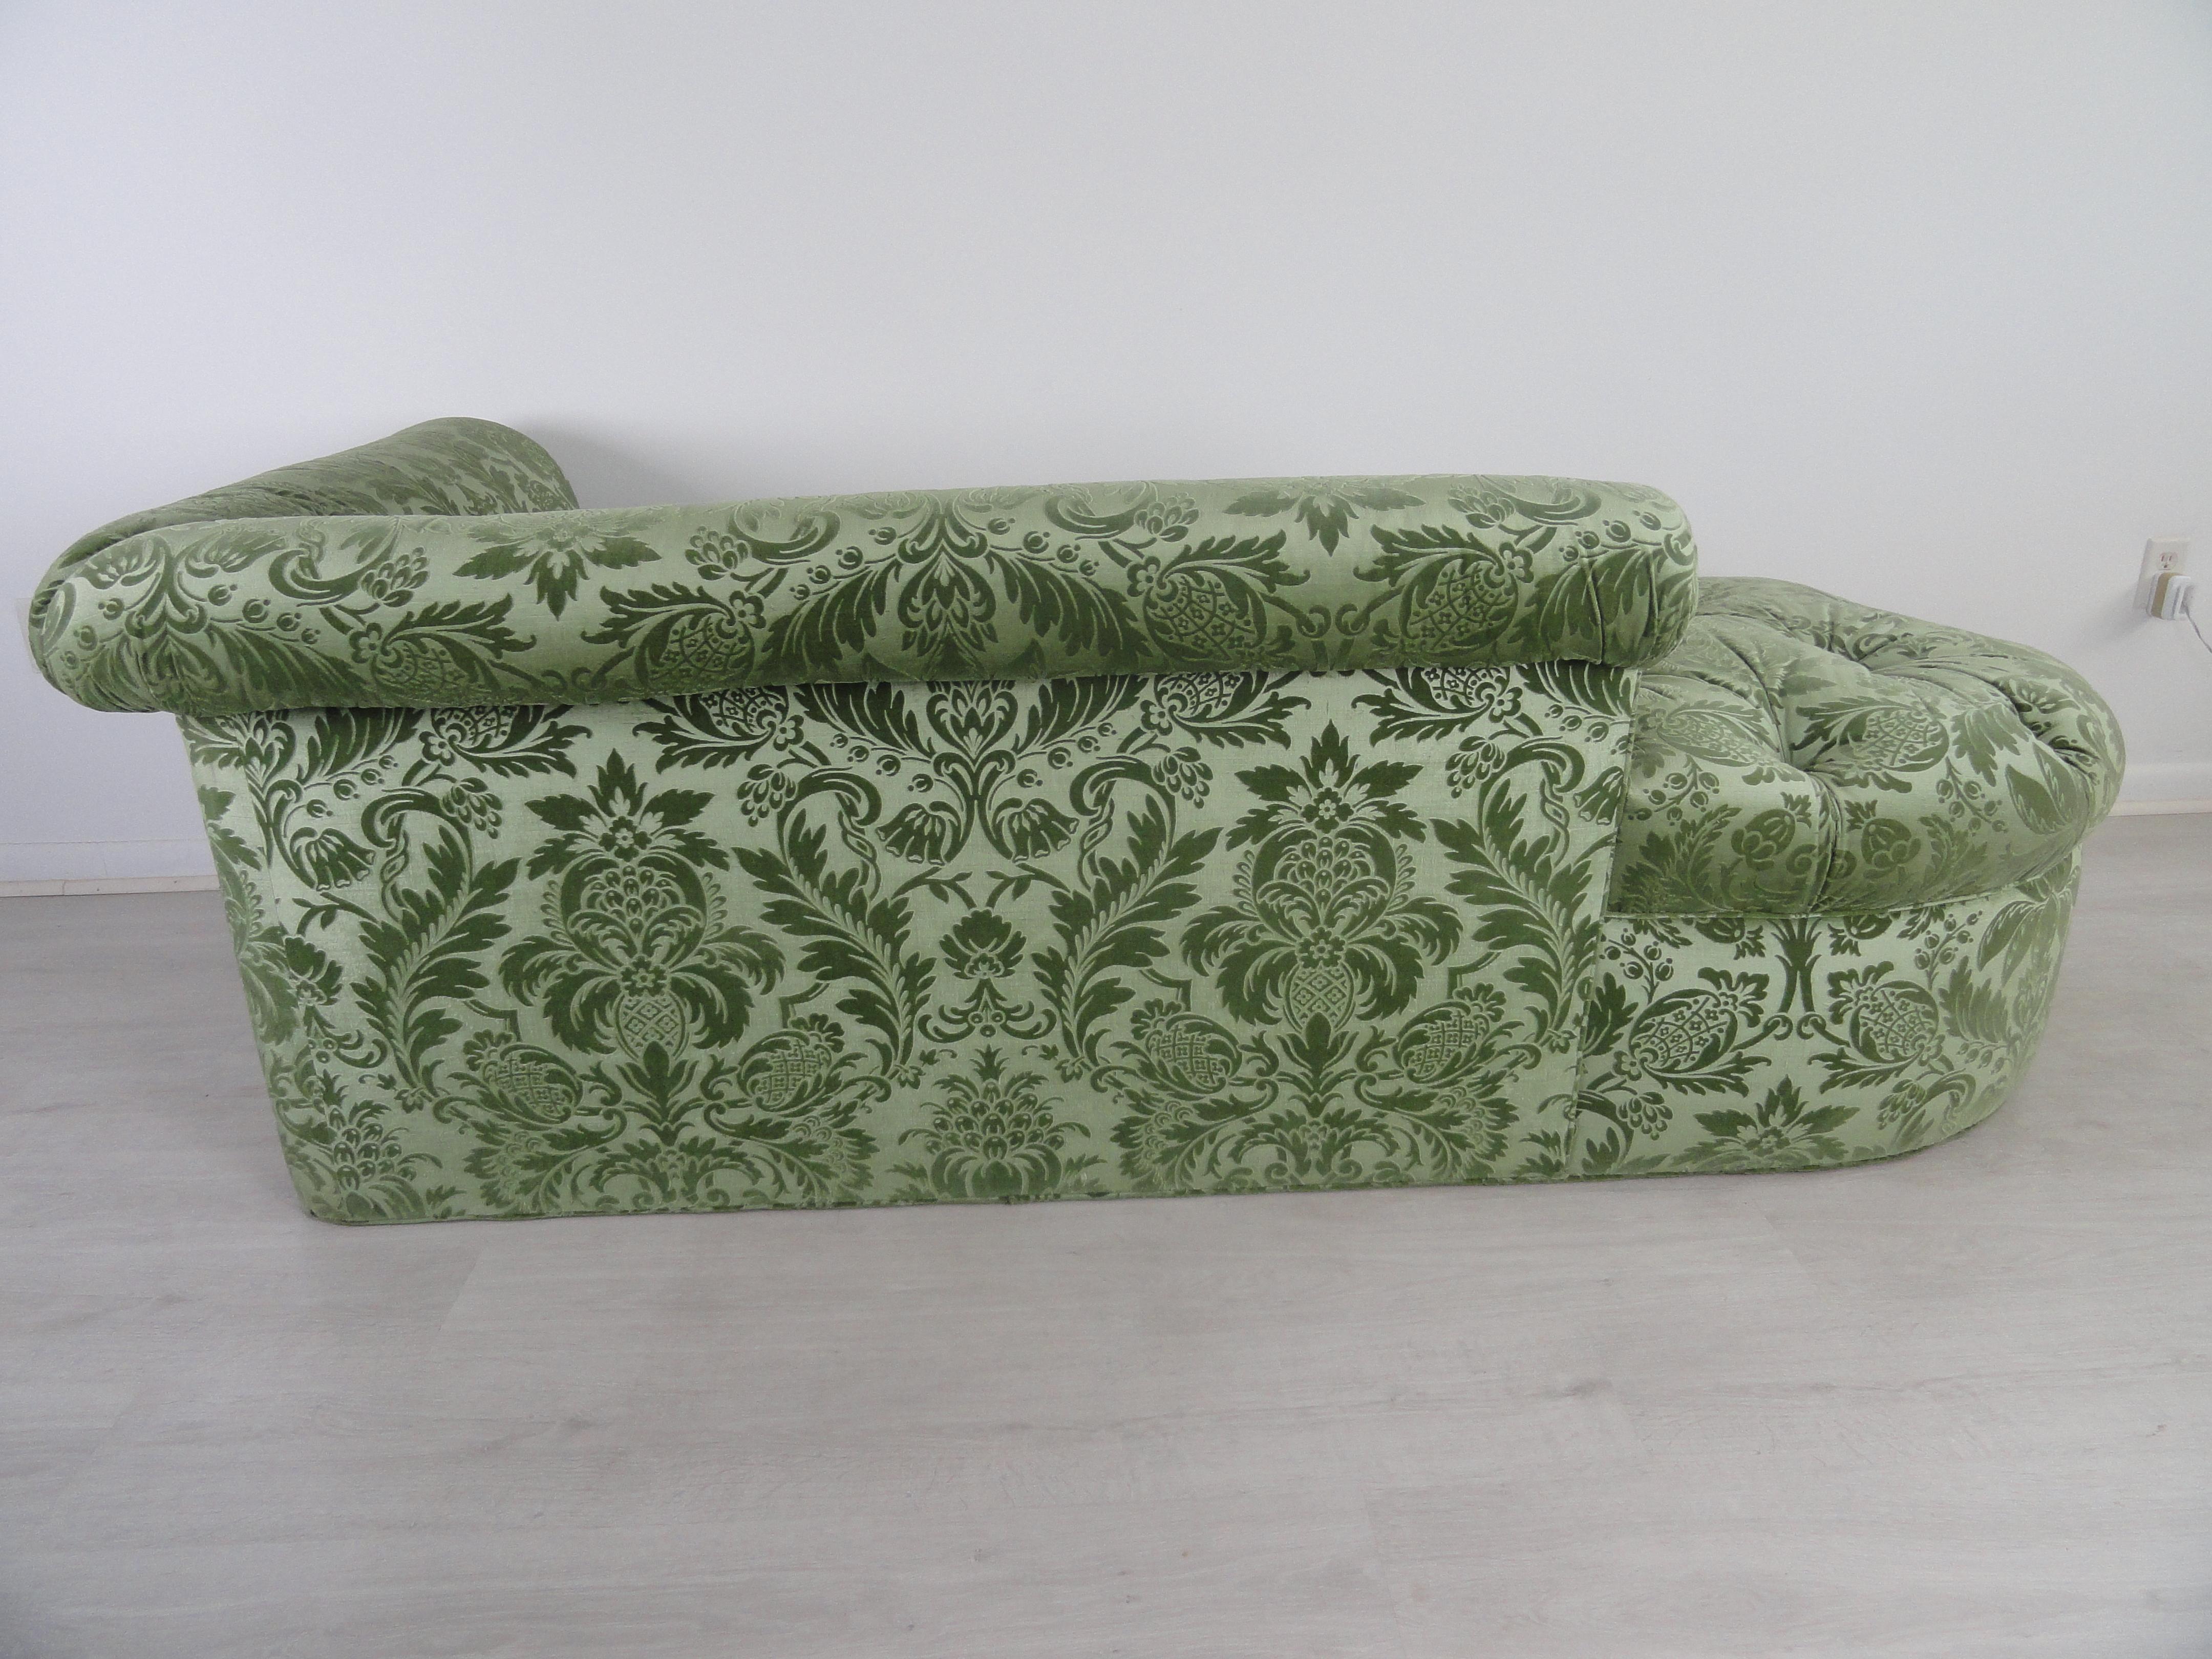 Pair of De Angelis, Ltd Custom Opposing Sofas/Daybeds For Sale 3